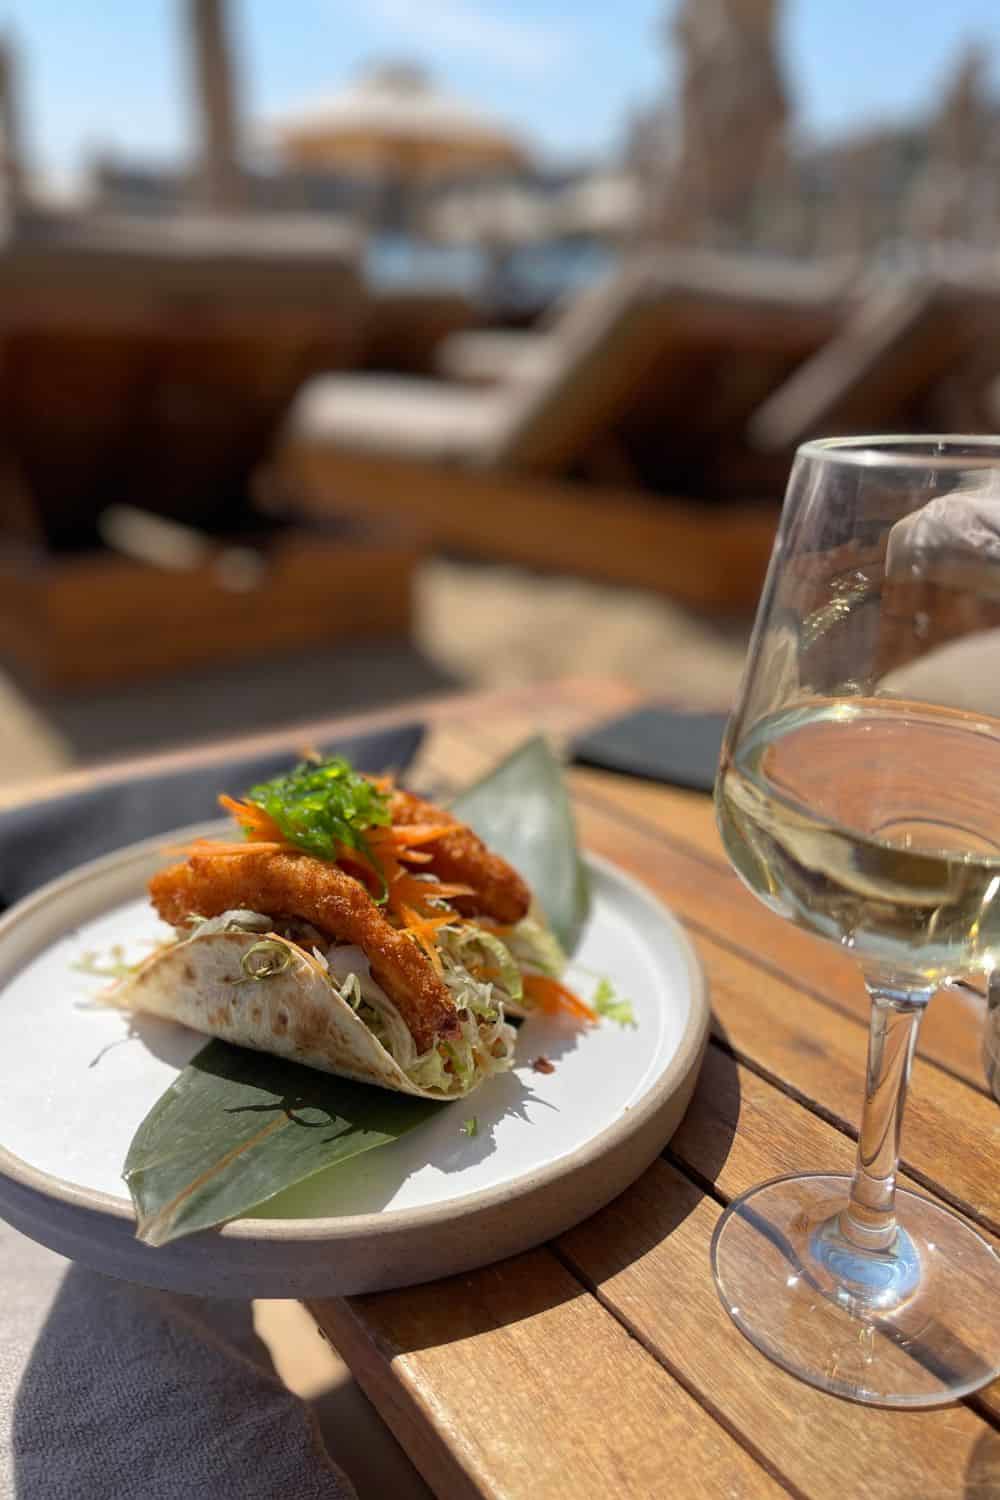 A close-up of a seafood taco on a white plate, paired with a glass of white wine on a wooden table with a blurred beach lounge background, capturing a relaxing dining experience by the sea.